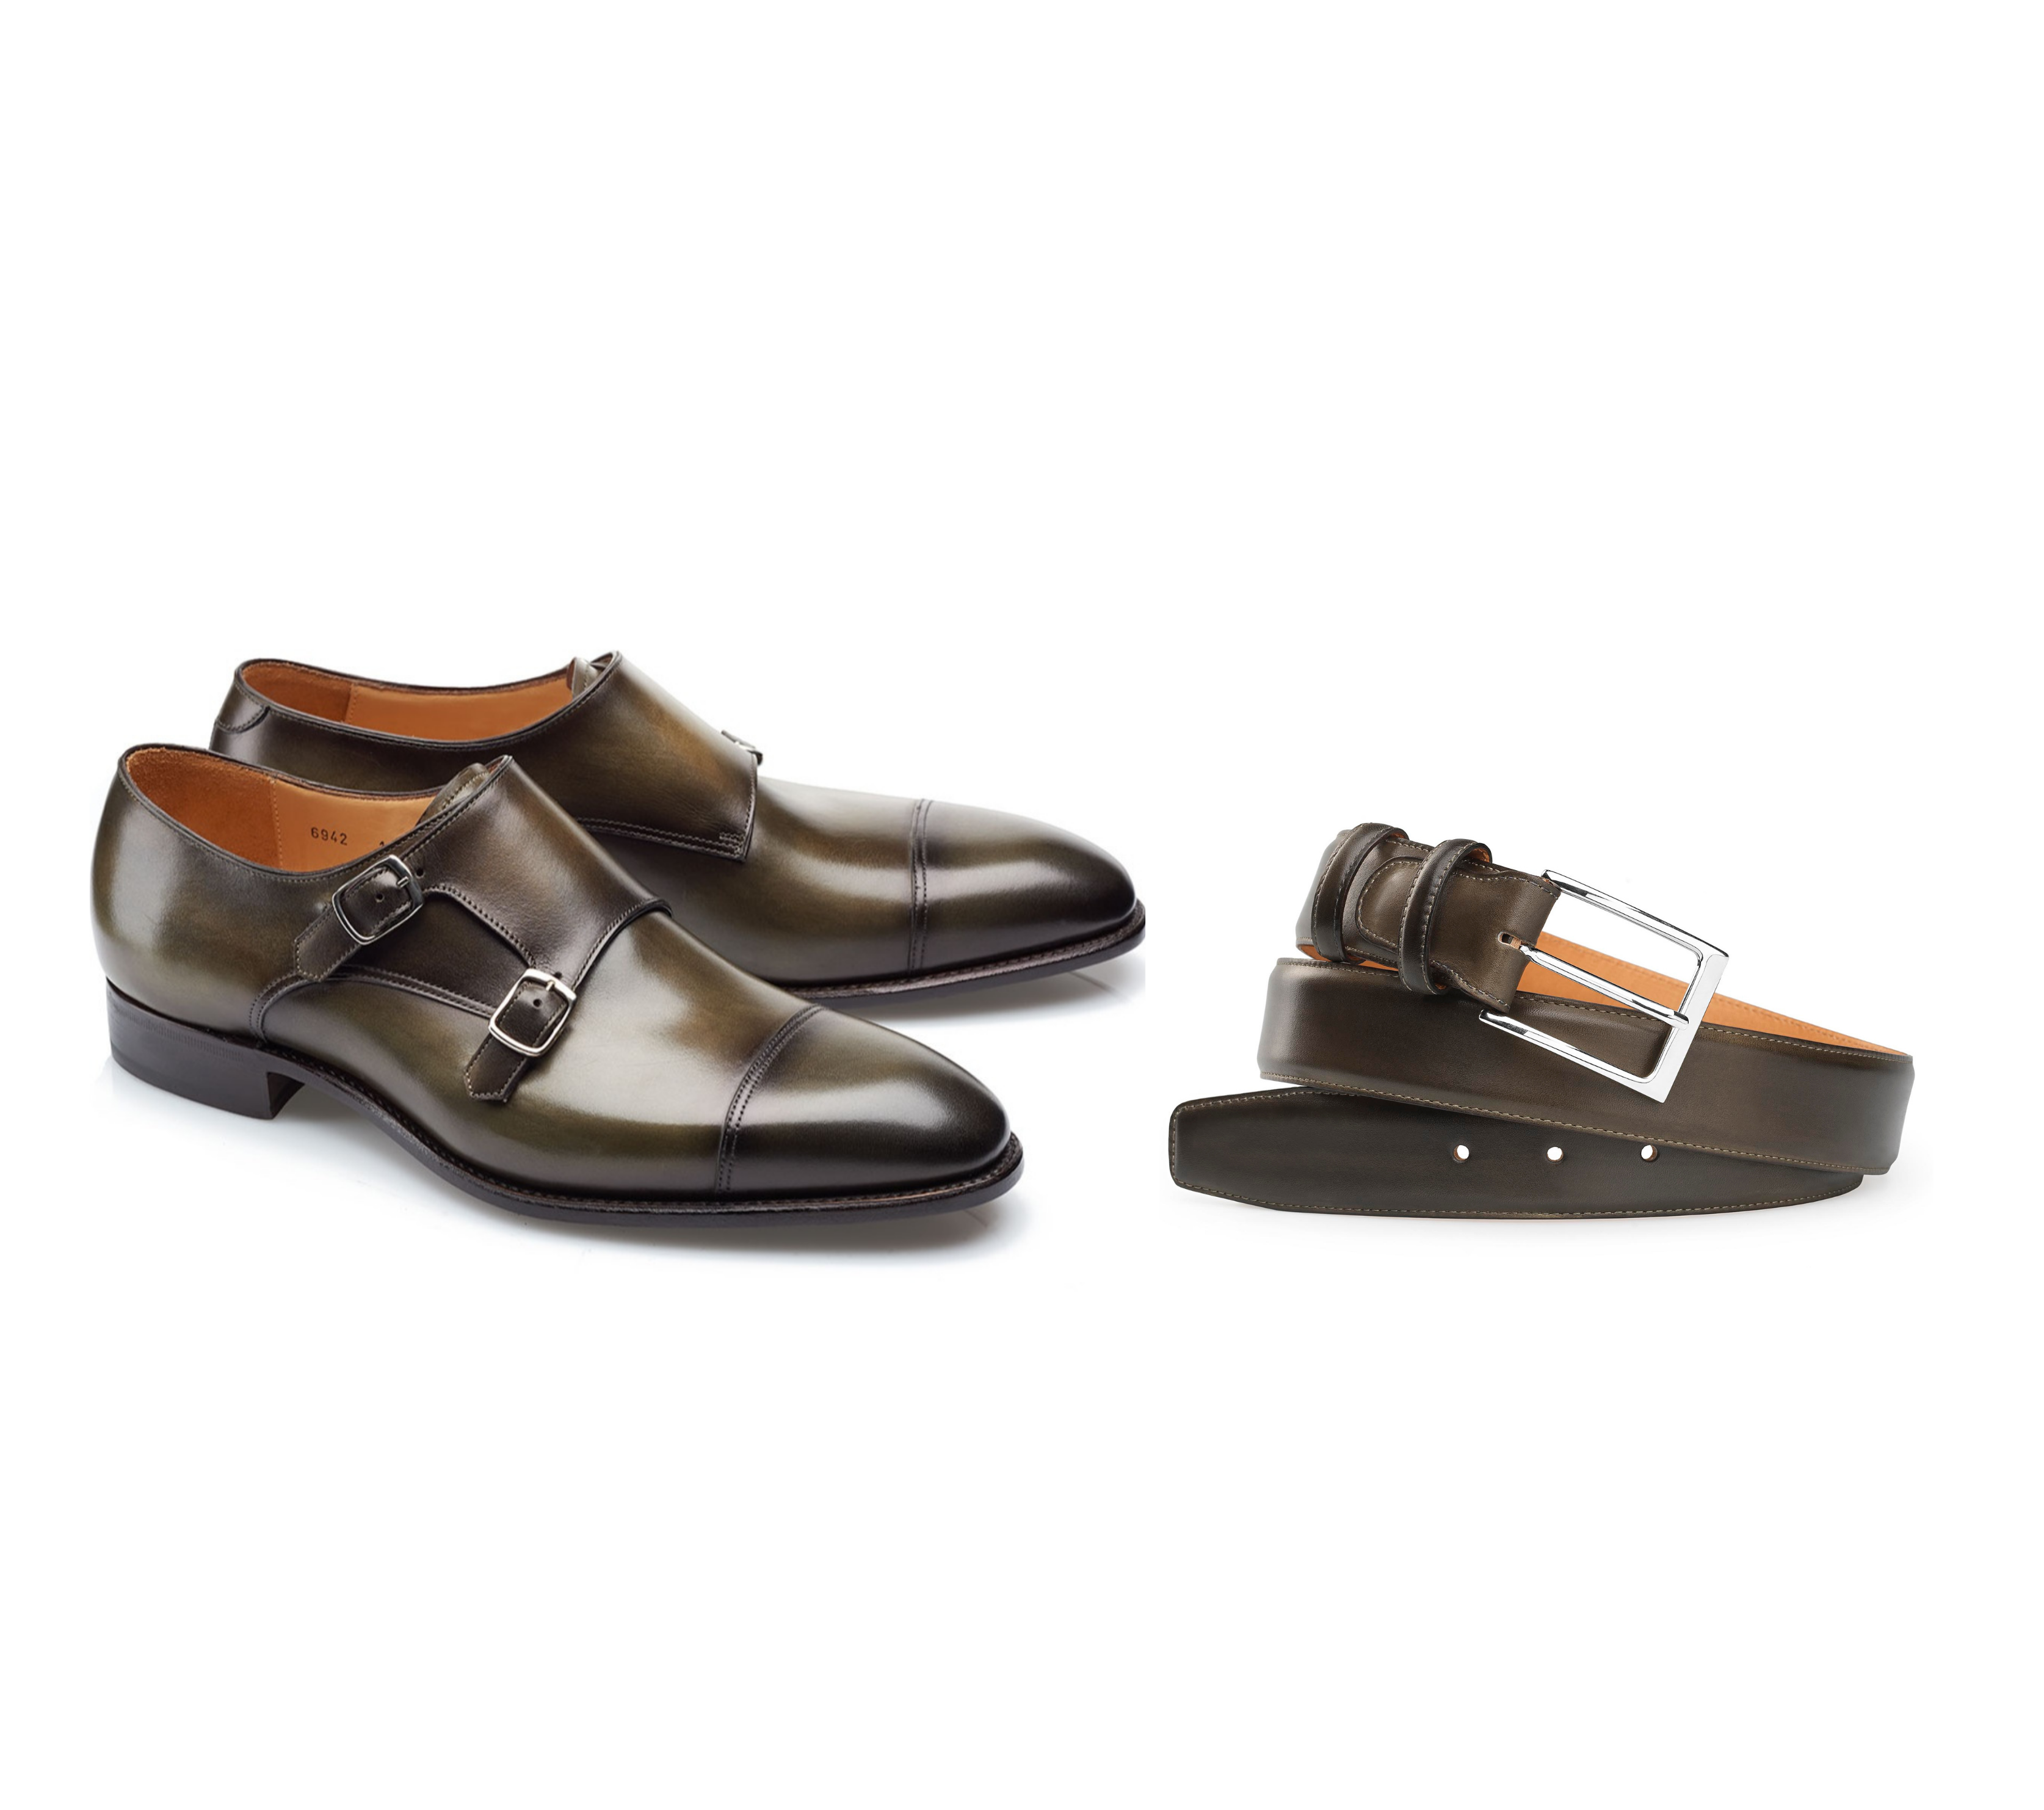 Double Buckle Shoes - Leather - PM Andrew Bosco